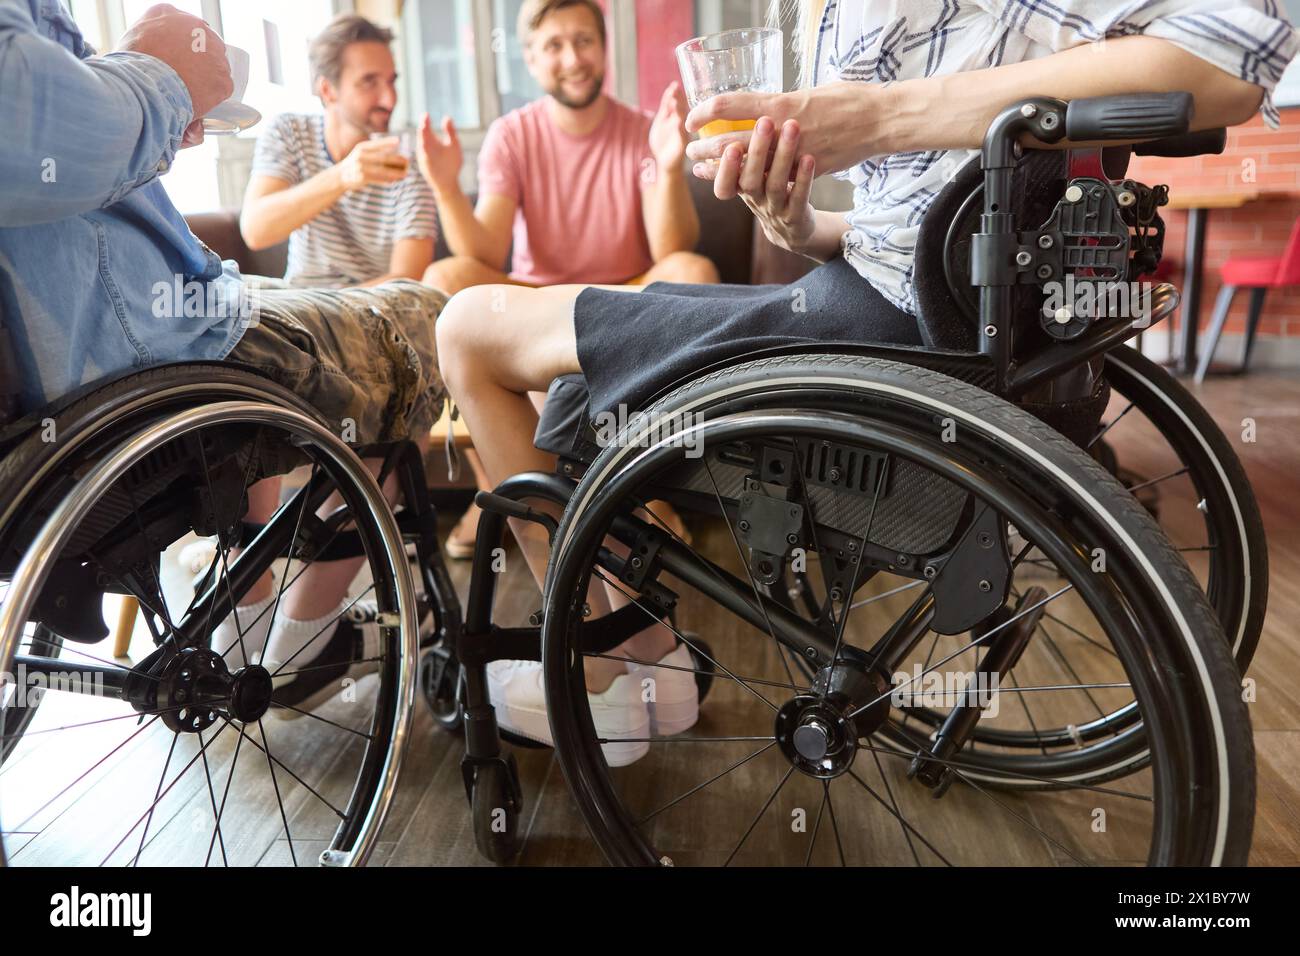 A friendly and inclusive social gathering at a cafe, featuring a person using a wheelchair engaged in a lively conversation with friends. Stock Photo